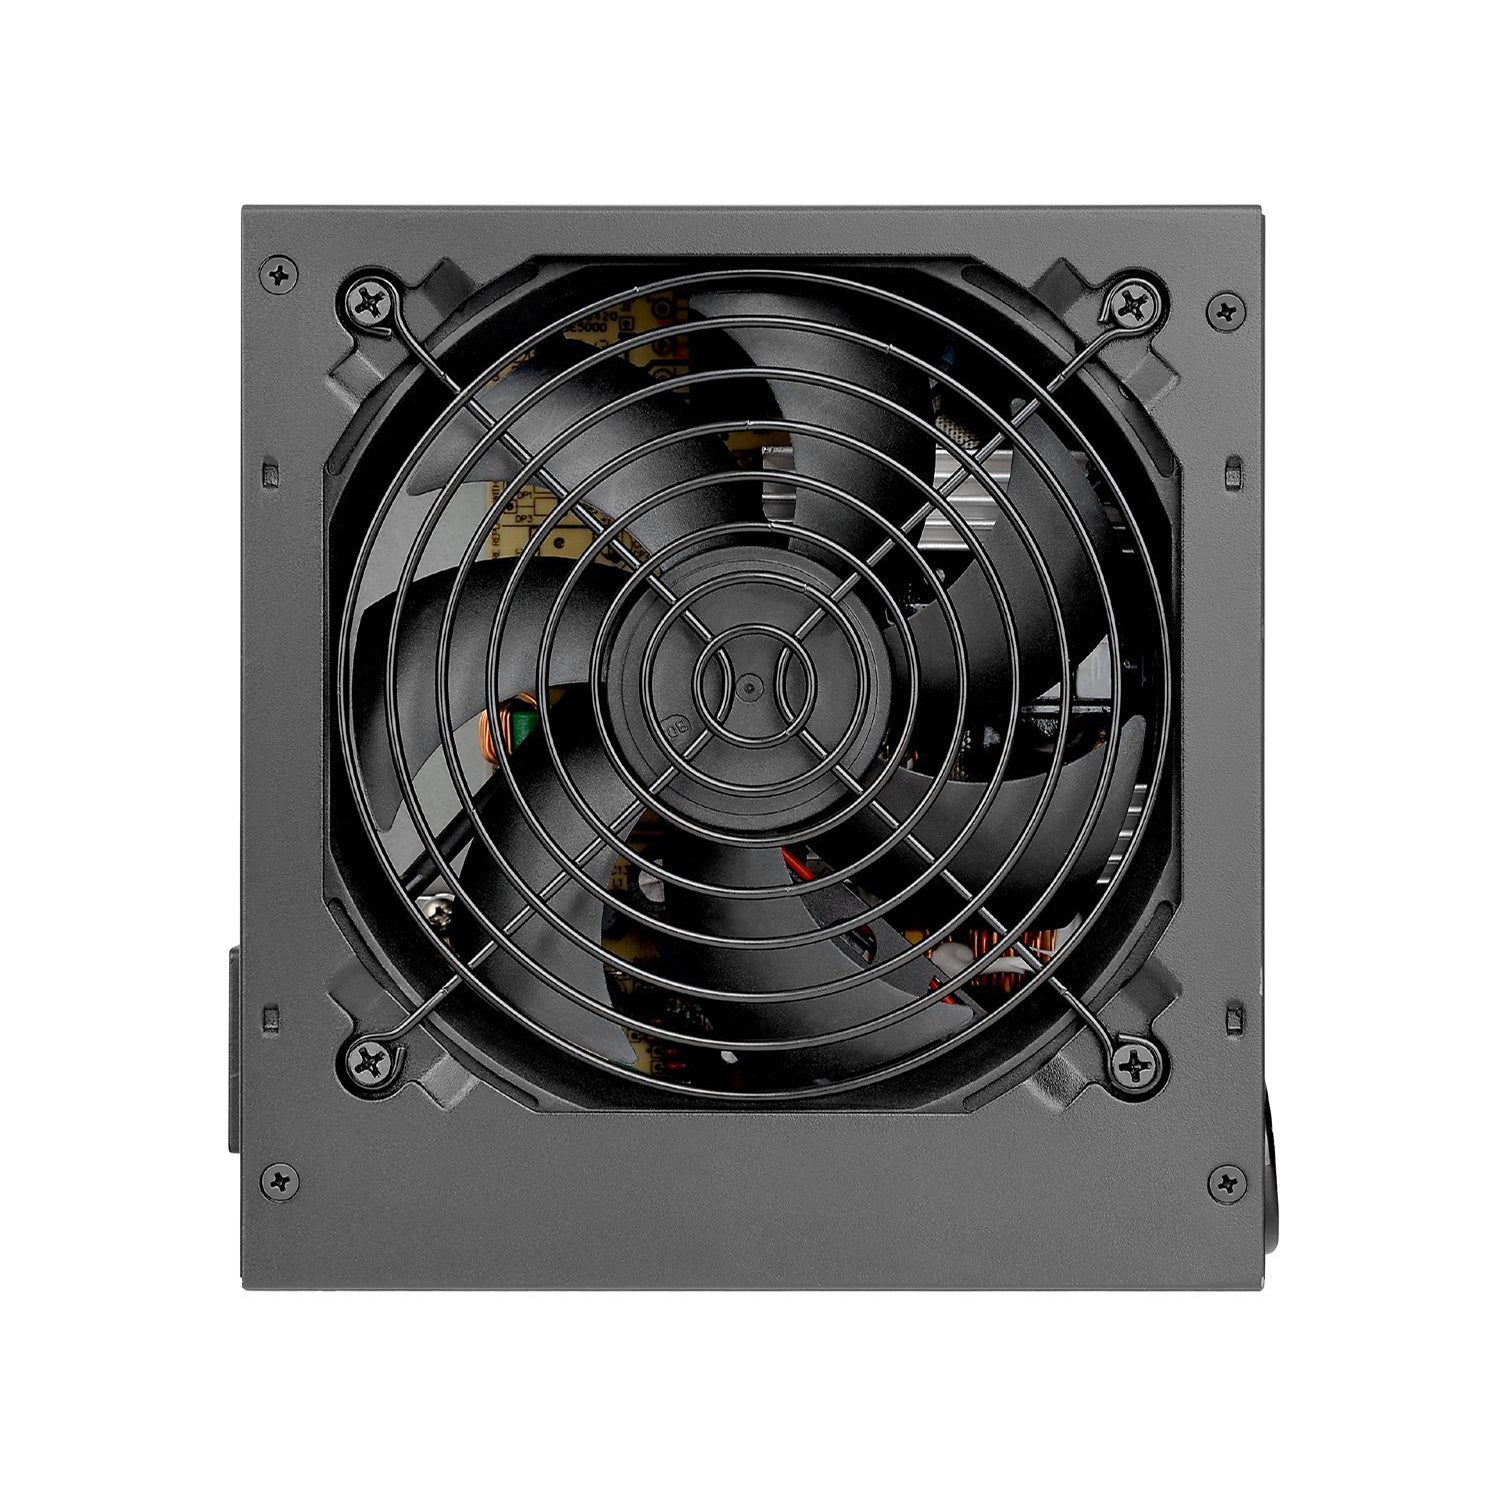 Thermaltake Smart Series 600W Power Supply SLI  CrossFire Ready Continuous Power, Intel ATX12V V2.3,PCI E, EPS12V 80 PLUS Certified Active PFC, Haswell Ready (PS-SPD-0600NPCWUS-W)